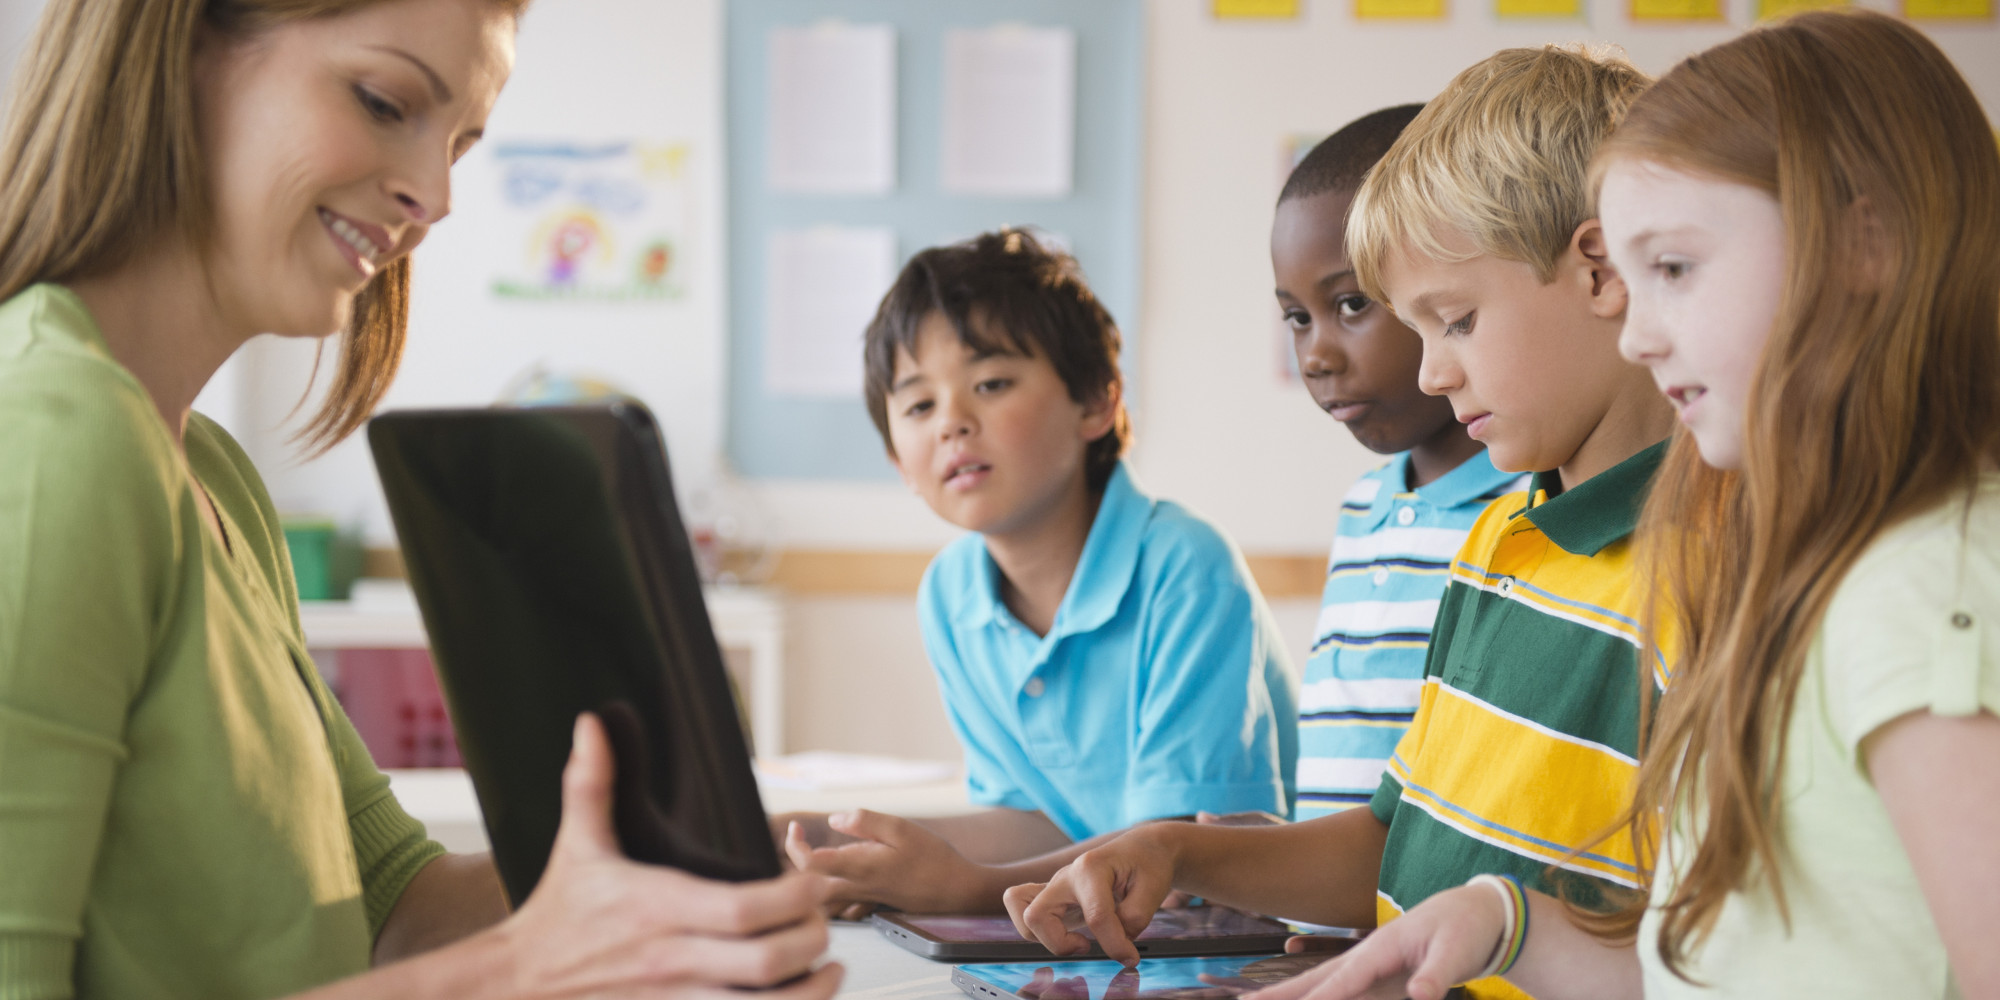 4 Smarter Ways to Optimize Teaching through Technology in the Classroom